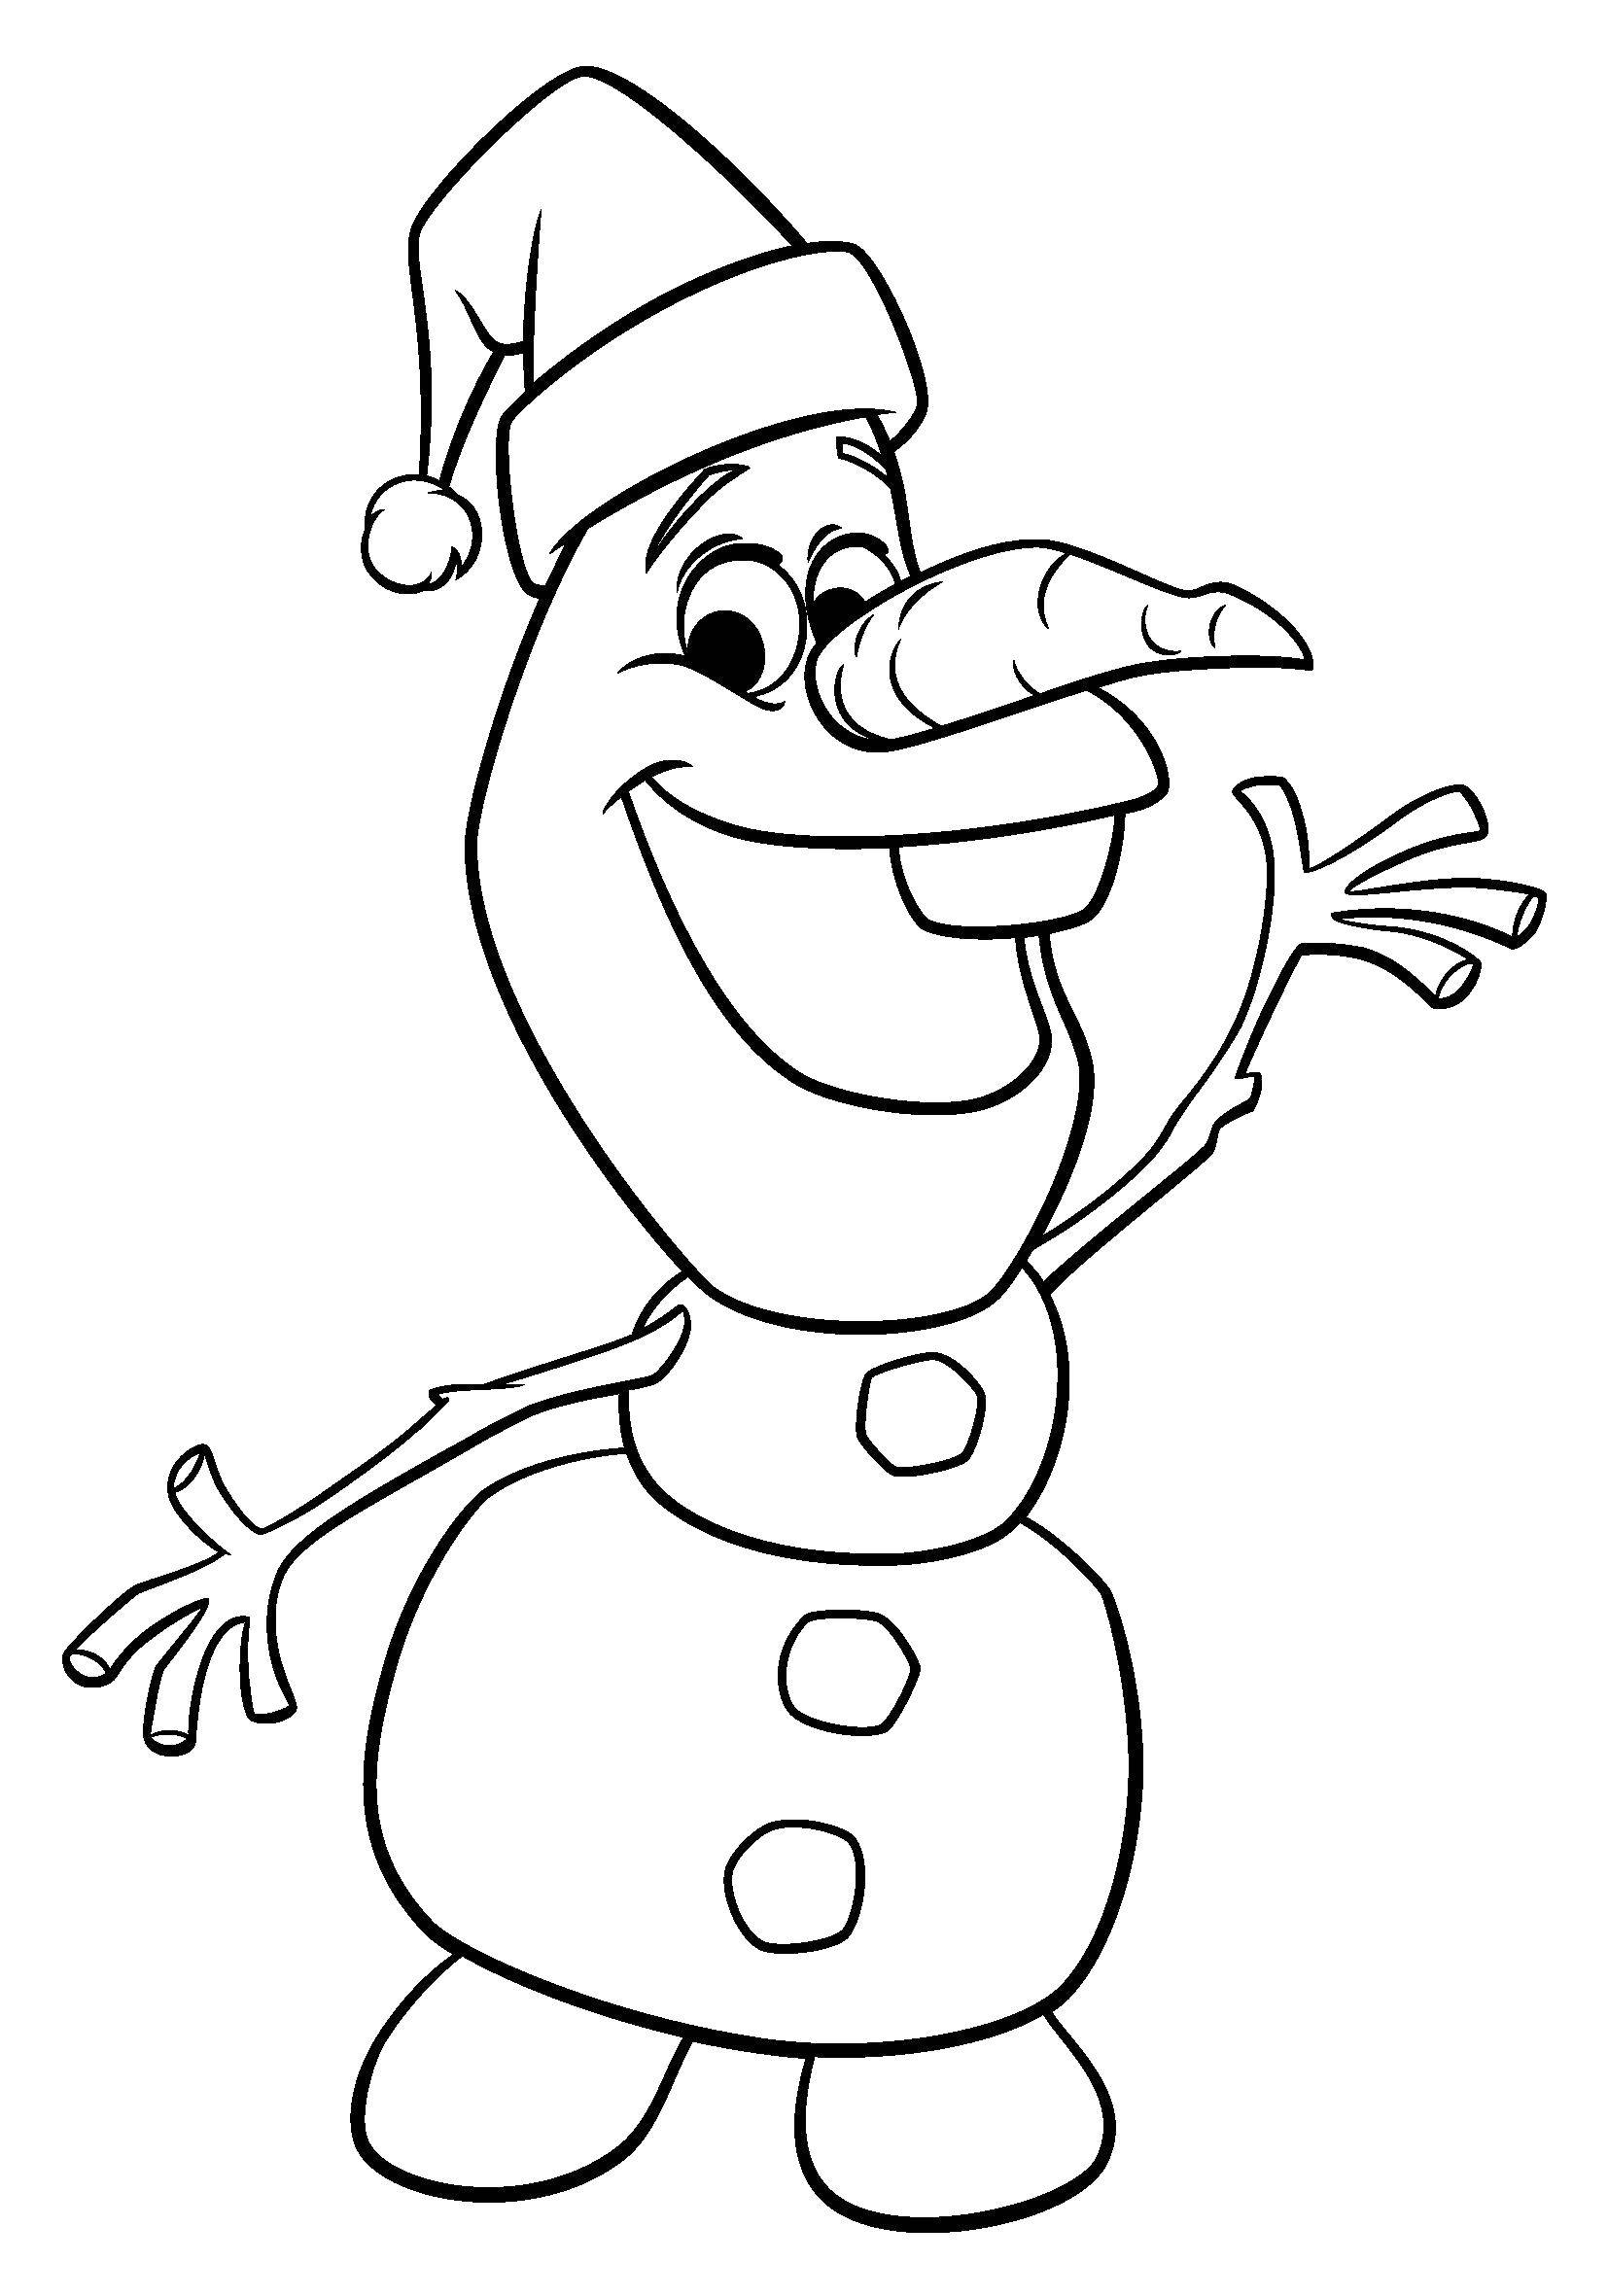 Coloring The snowman from the cartoon .. Category coloring cold heart. Tags:  Disney, Elsa, frozen, Princess.